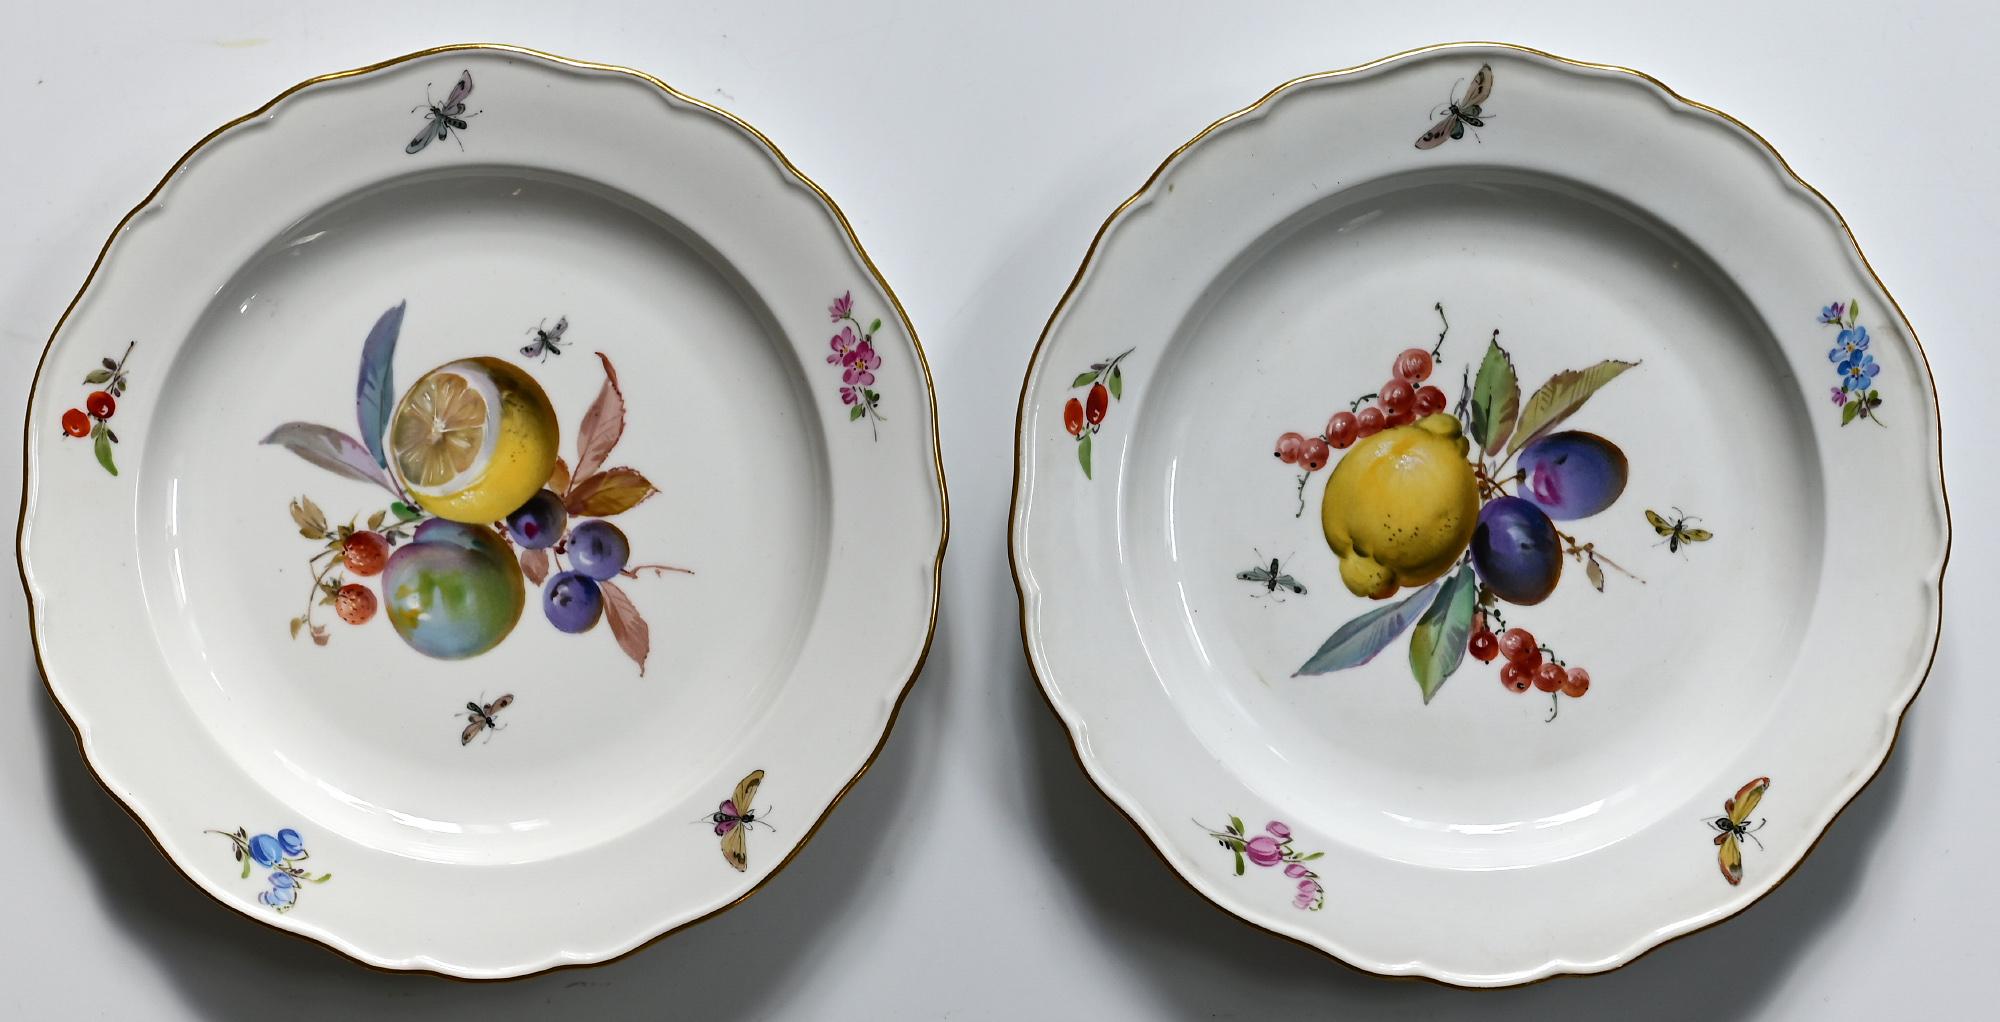 Set of 12 Meissen Plates with Fruits, Insects and Flowers 19.Jhdt Porcelain 4